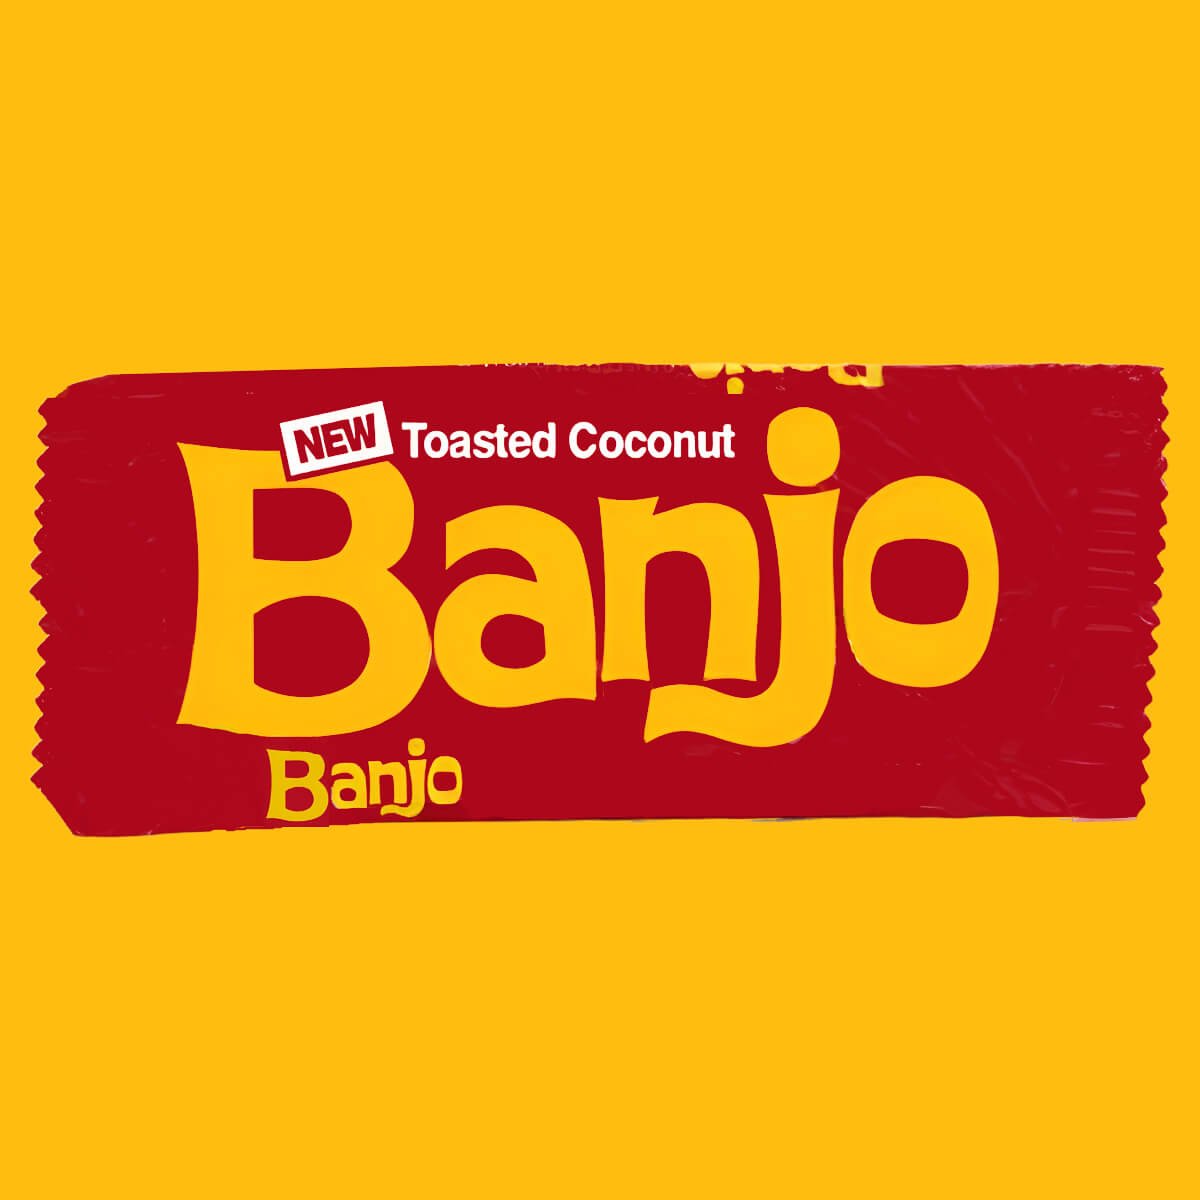 Wrapper from Banjo Toasted Coconut flavour. Red with yellow text logo.